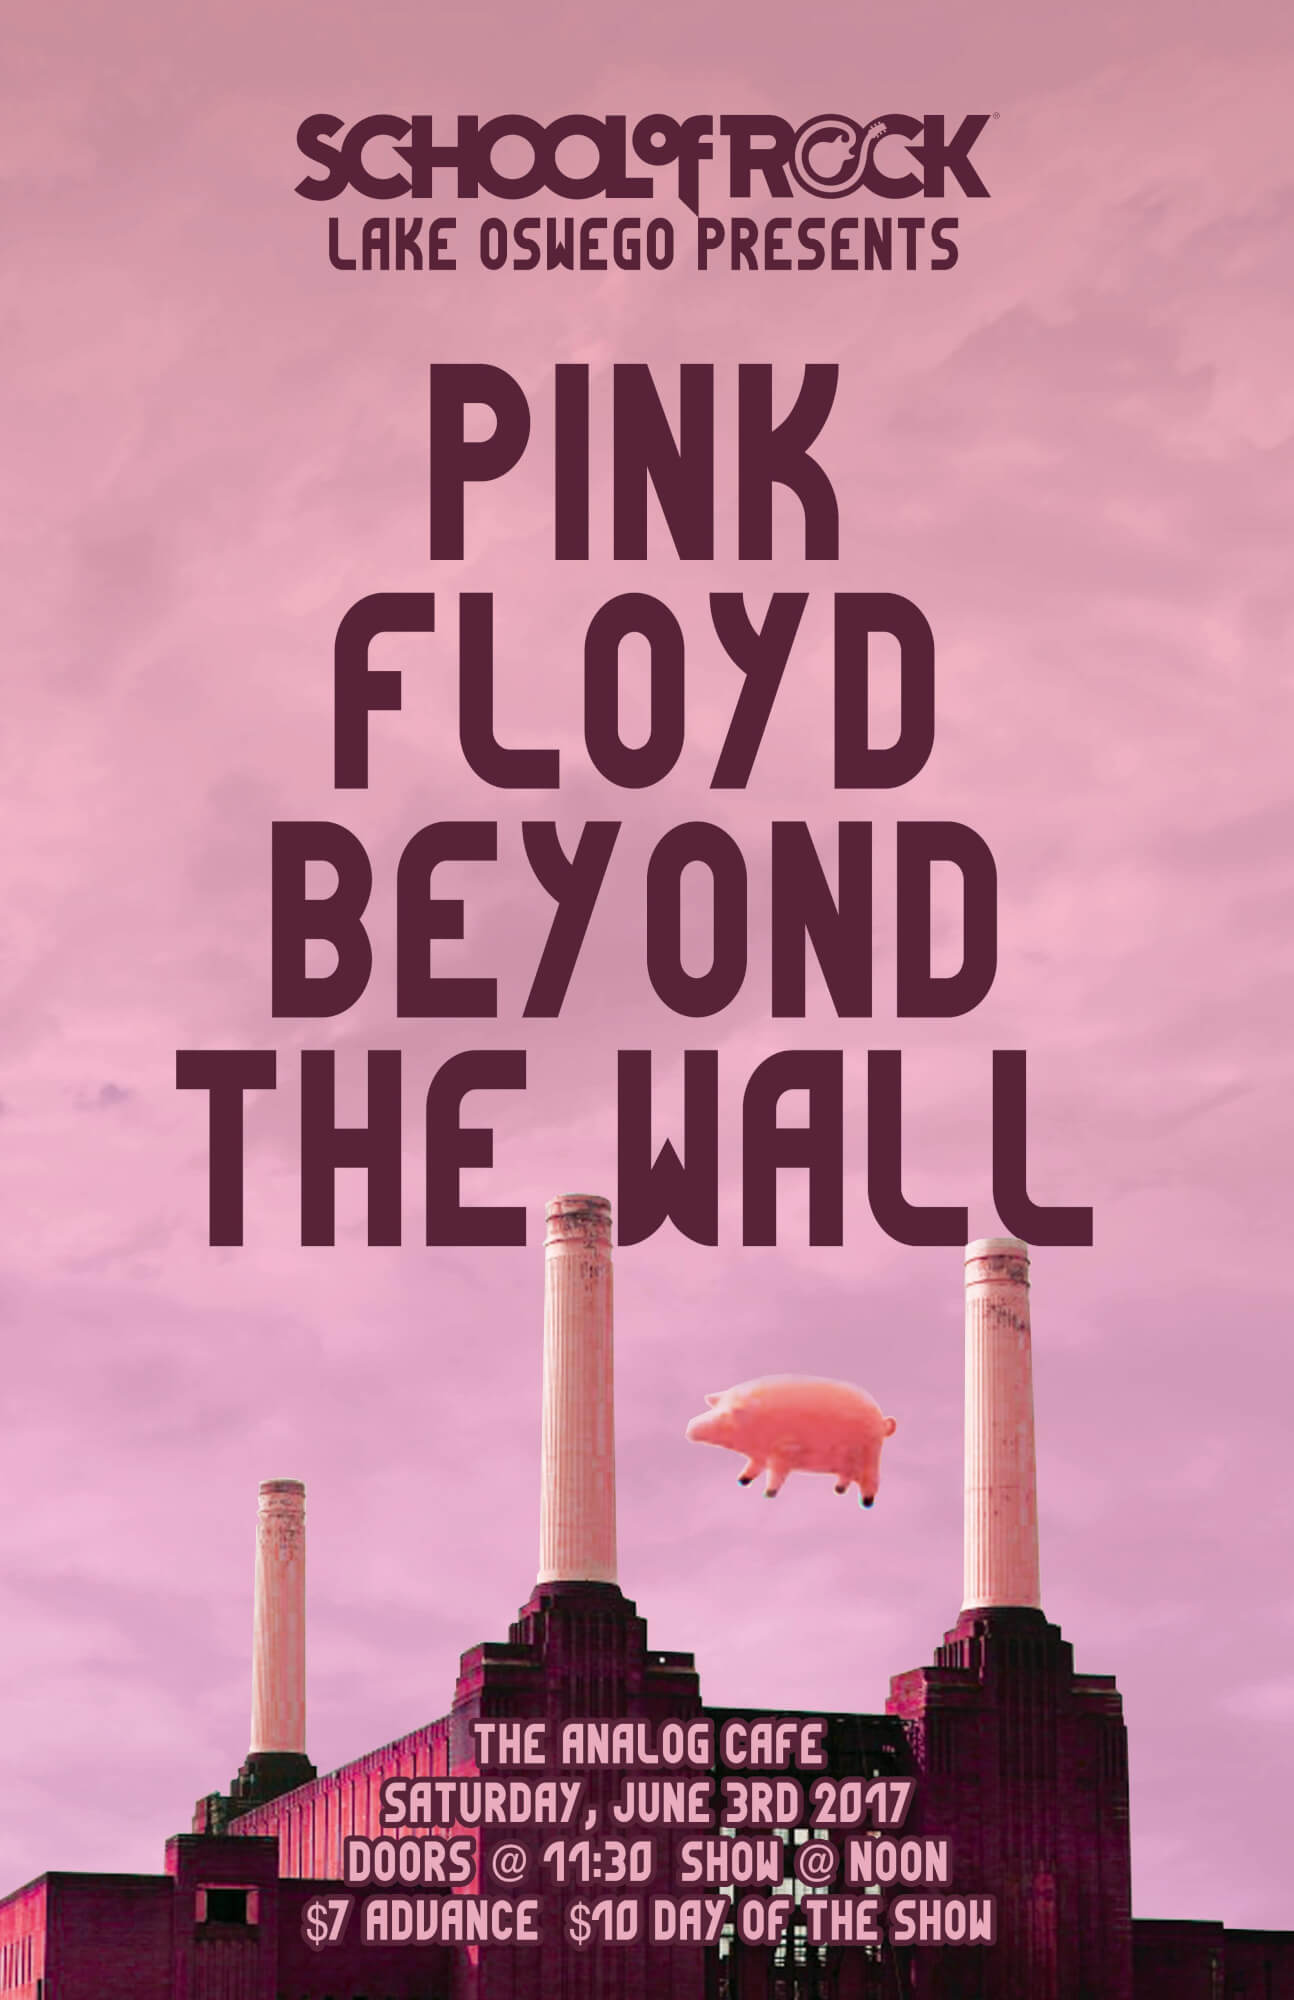 Pink Floyd Beyond the Wall